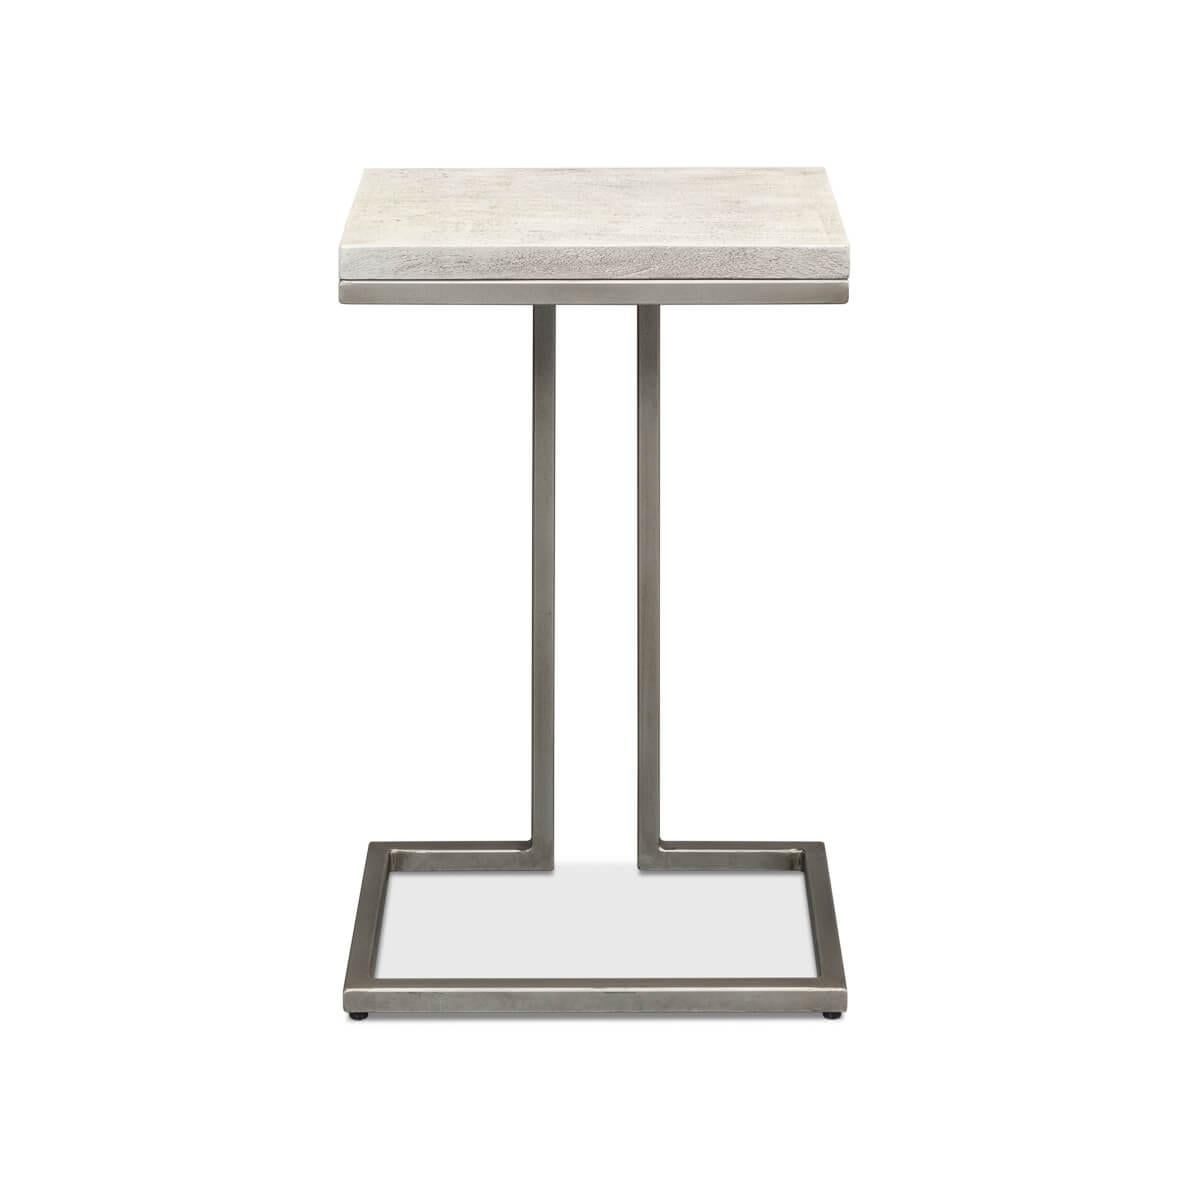 This piece features a compact, textured painted wood surface, presenting an earthy, grounded aesthetic. The streamlined, gunmetal iron base offers a contemporary contrast with its reflective finish and sharp angles.

Its small footprint makes it an